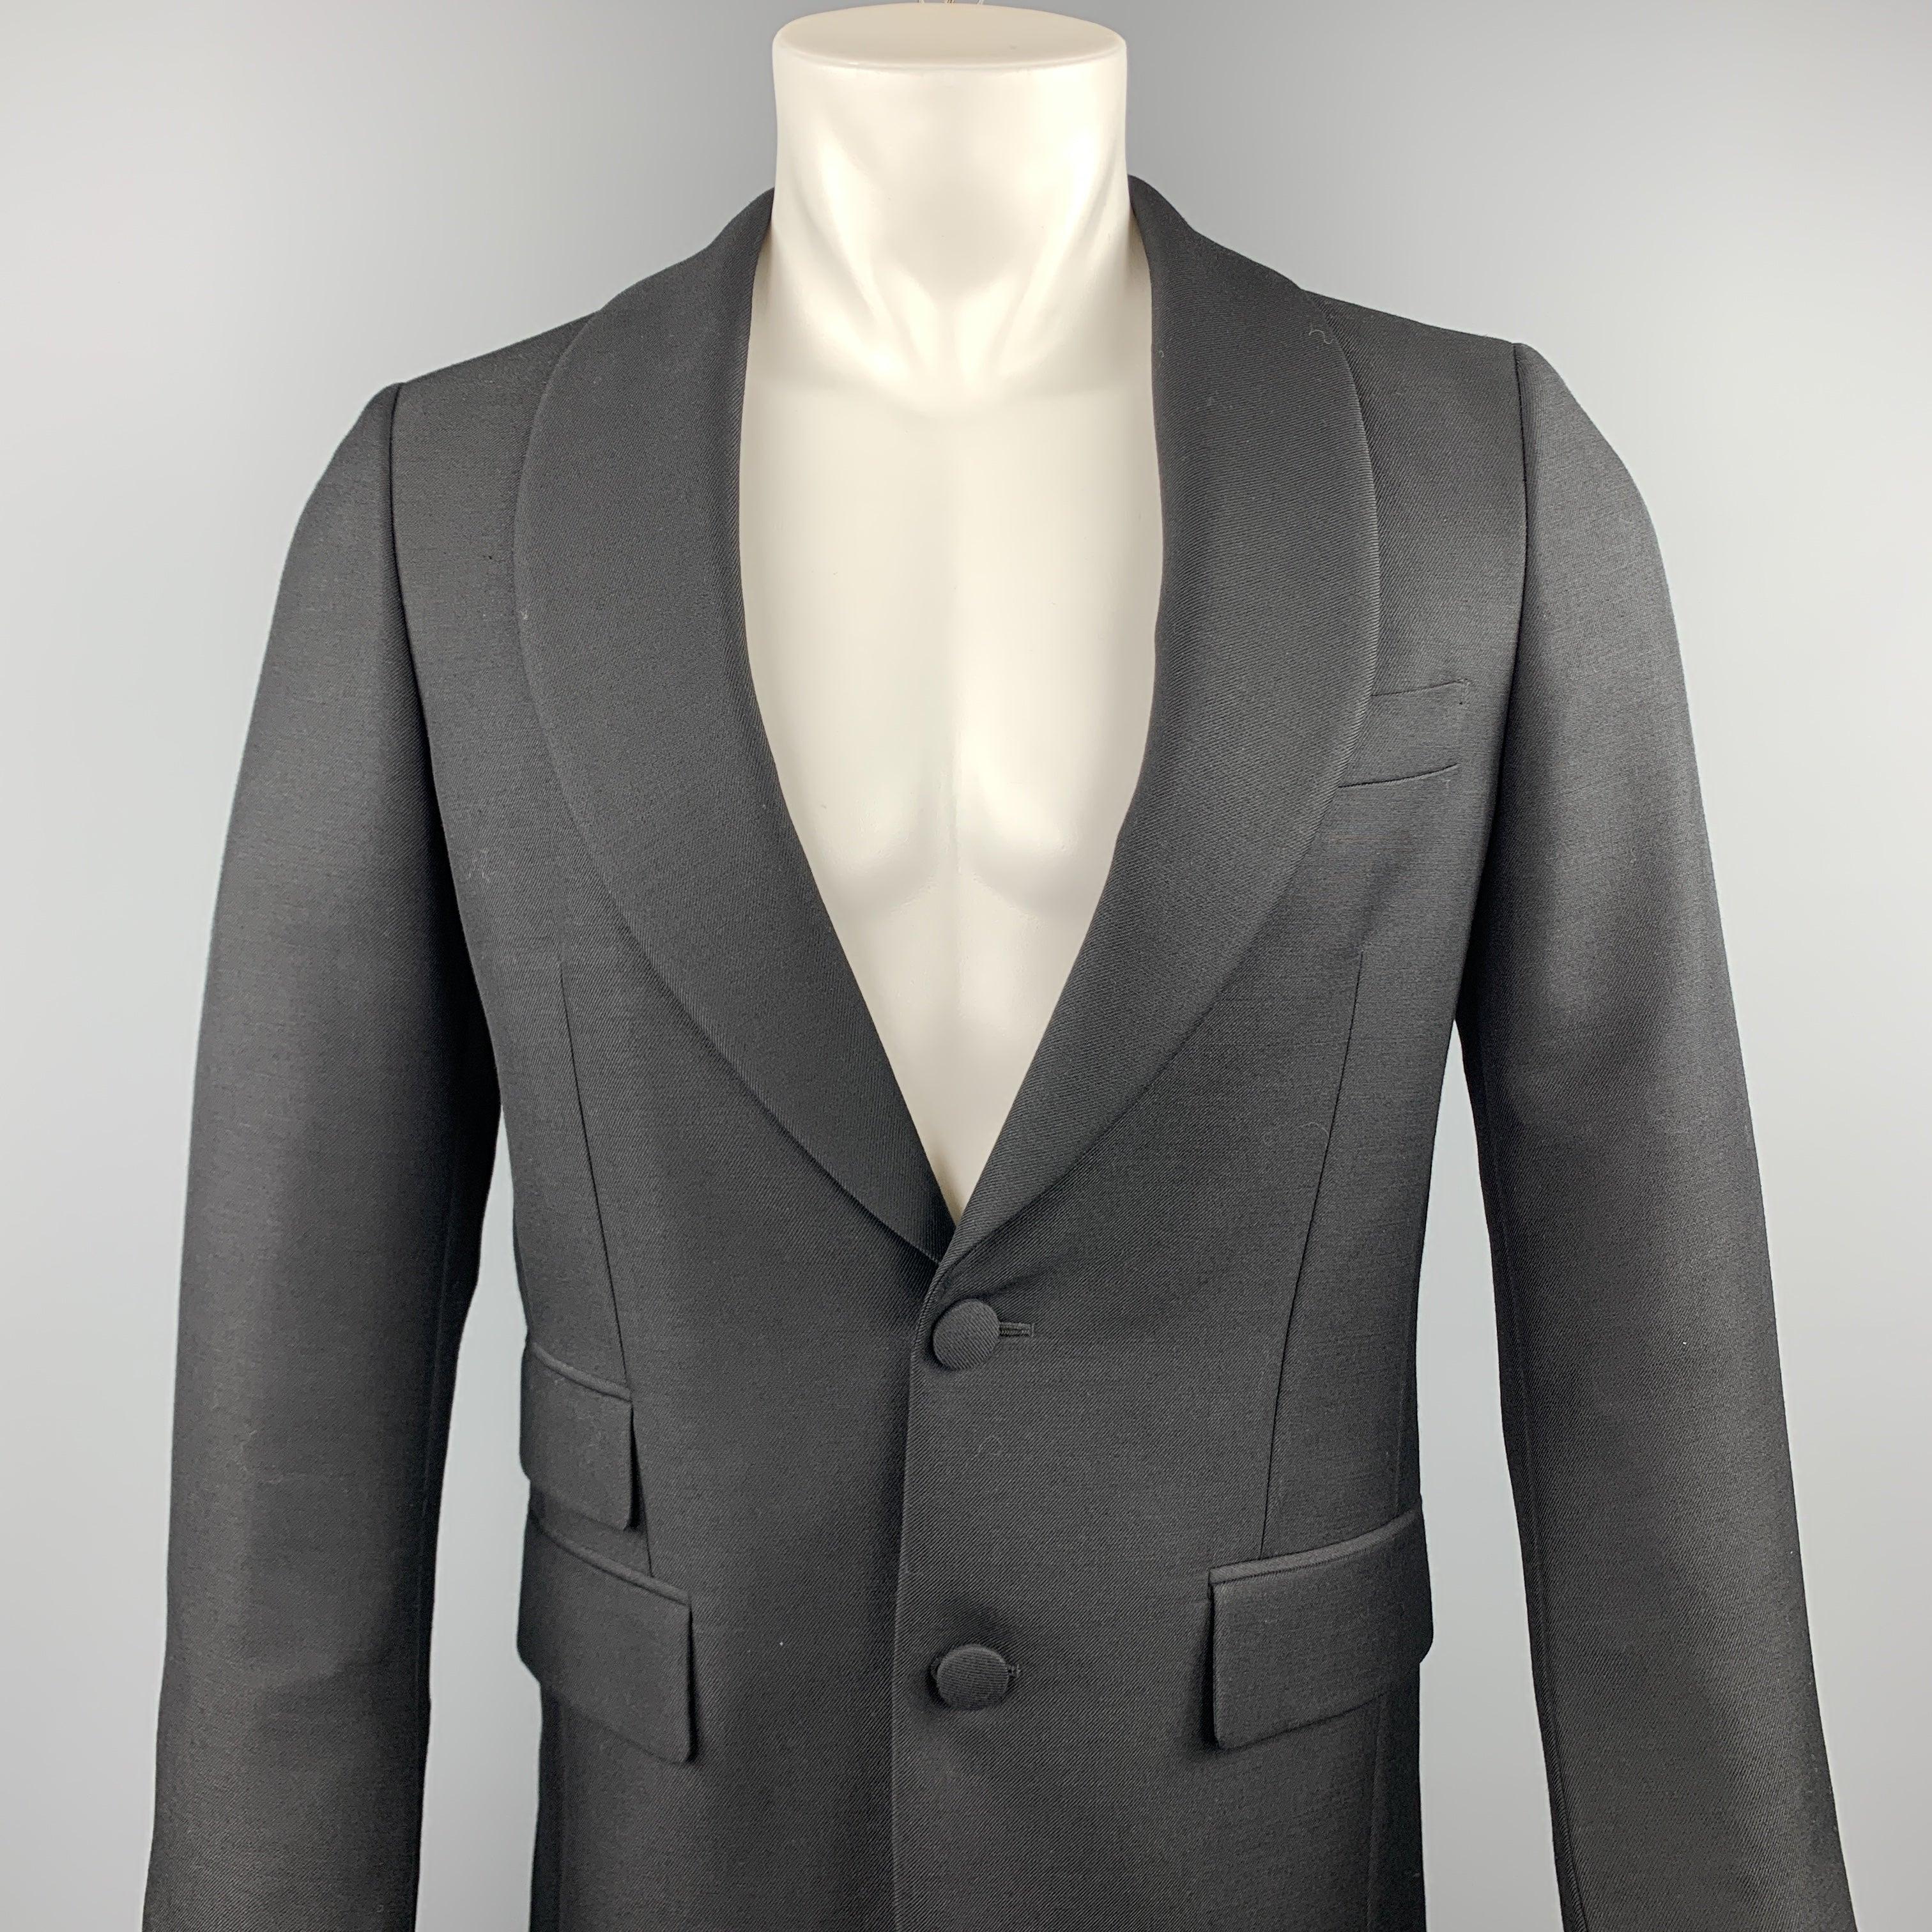 PRADA sport coat comes in a black wool / mohair featuring a shawl lapel style, flap pockets, and a two button closure. Made in Italy.Excellent Pre-Owned Condition. 

Marked:   IT 46 

Measurements: 
 
Shoulder: 16 inches Chest: 36 inches 
Sleeve: 27